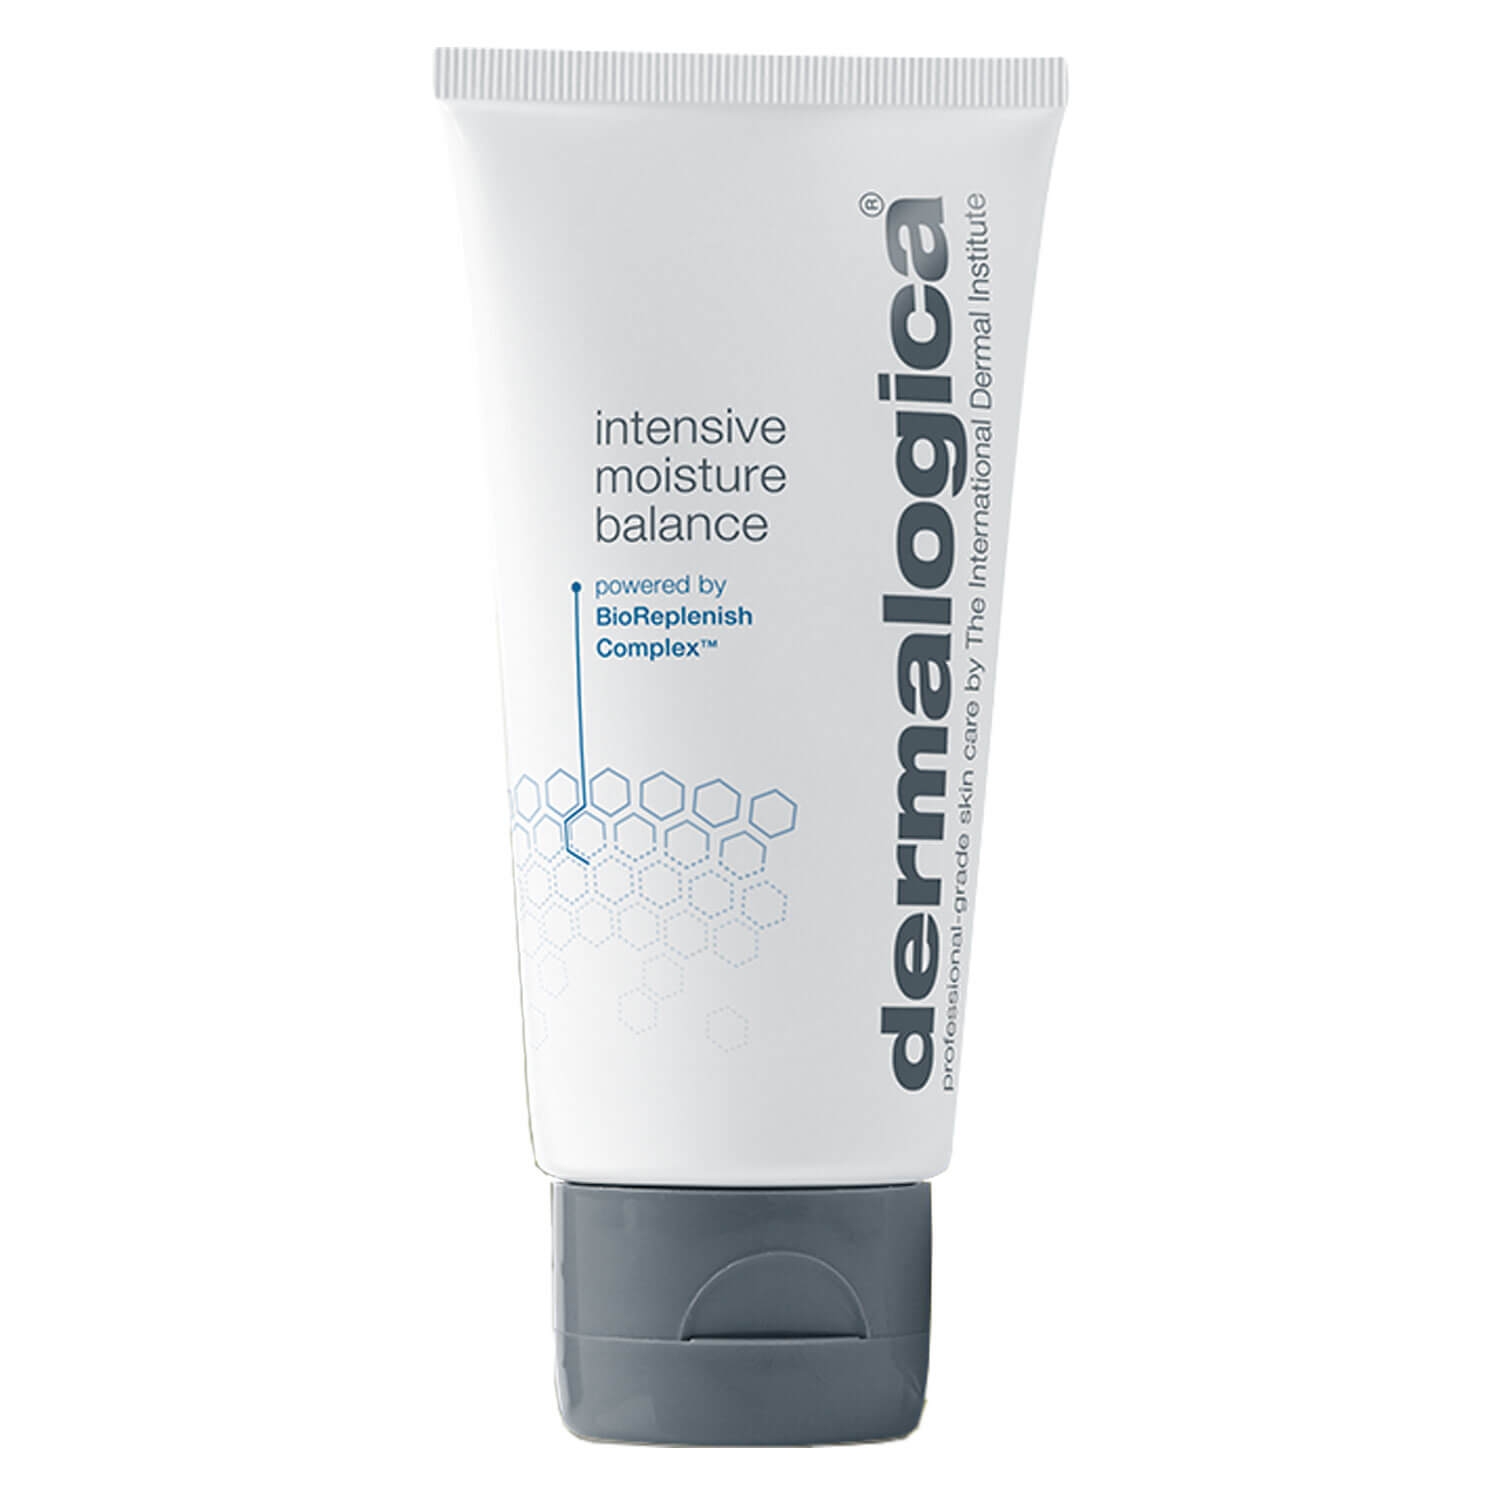 Product image from Moisturizers - Intensive Moisture Balance 2.0